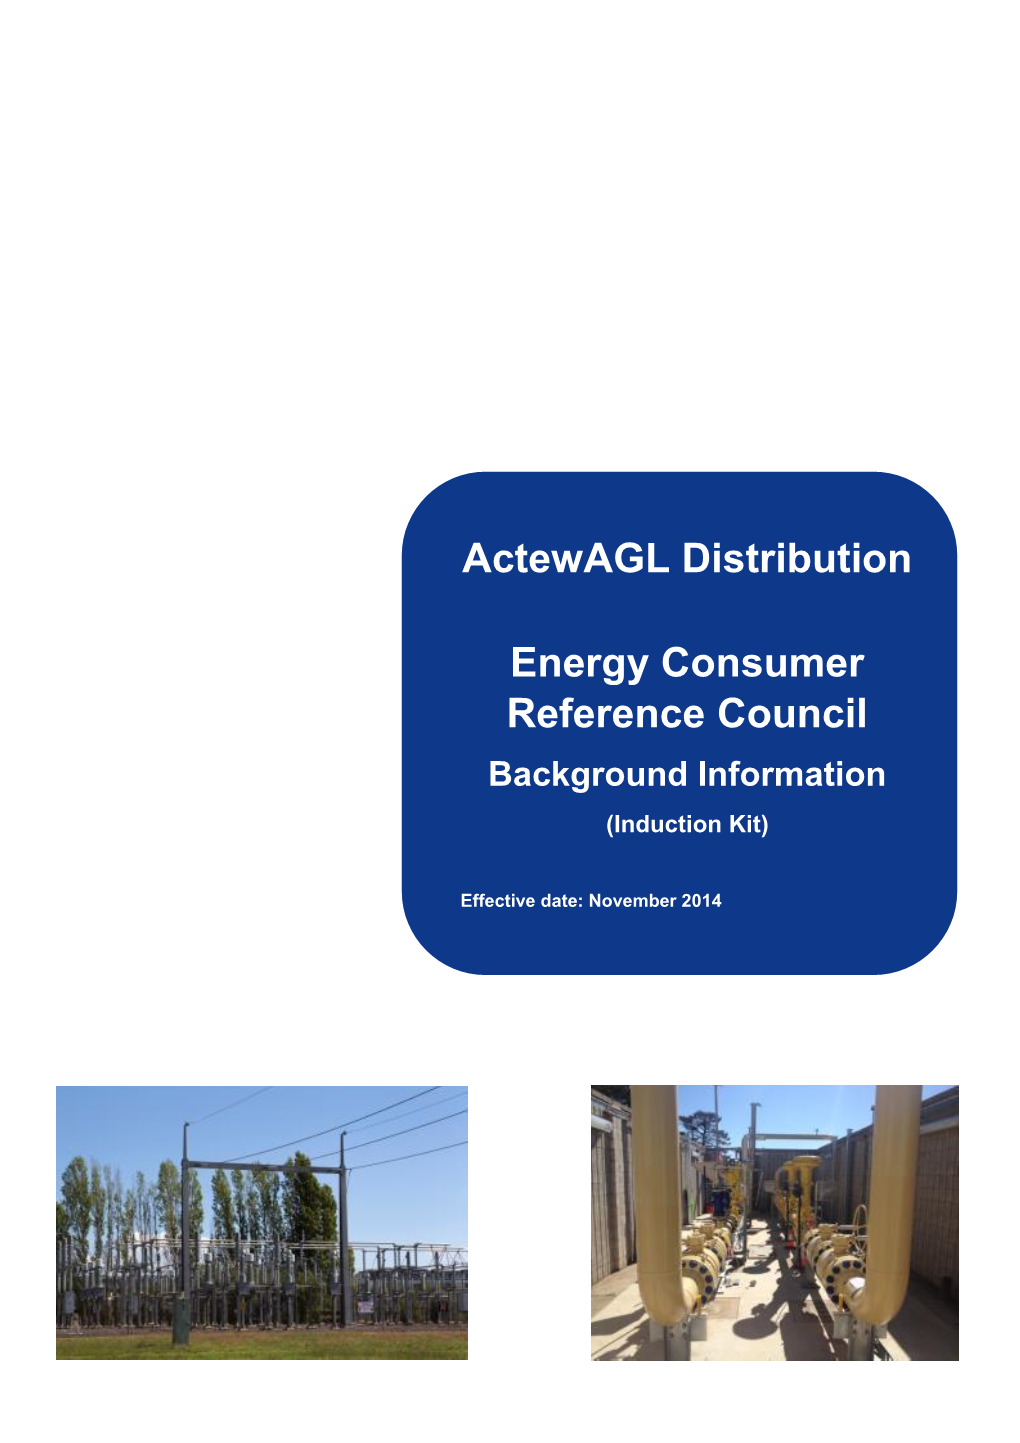 Actewagl Distribution Energy Consumer Reference Council